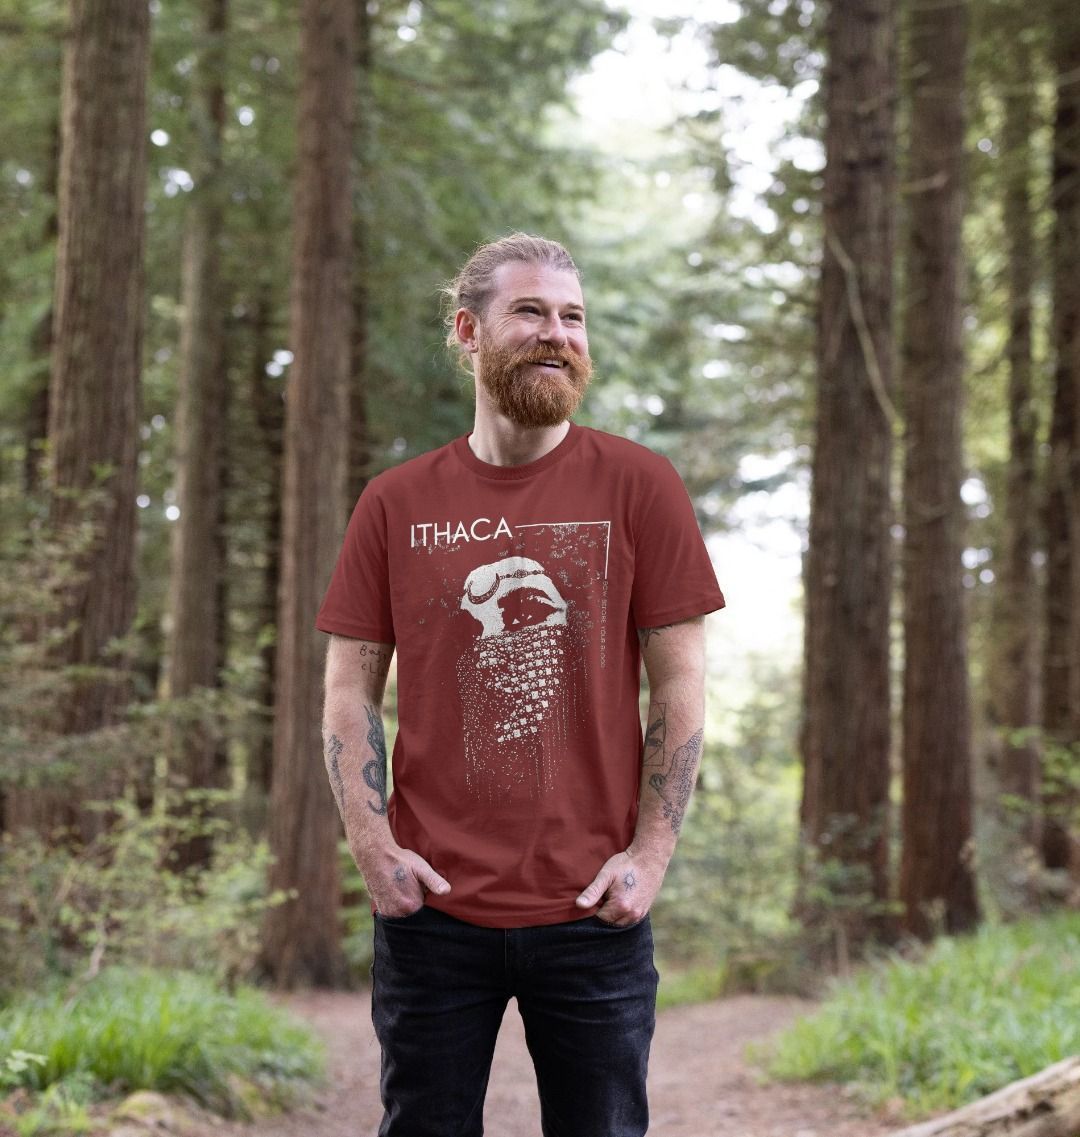 Ithaca 'Bow Before Your Blood' T-Shirt